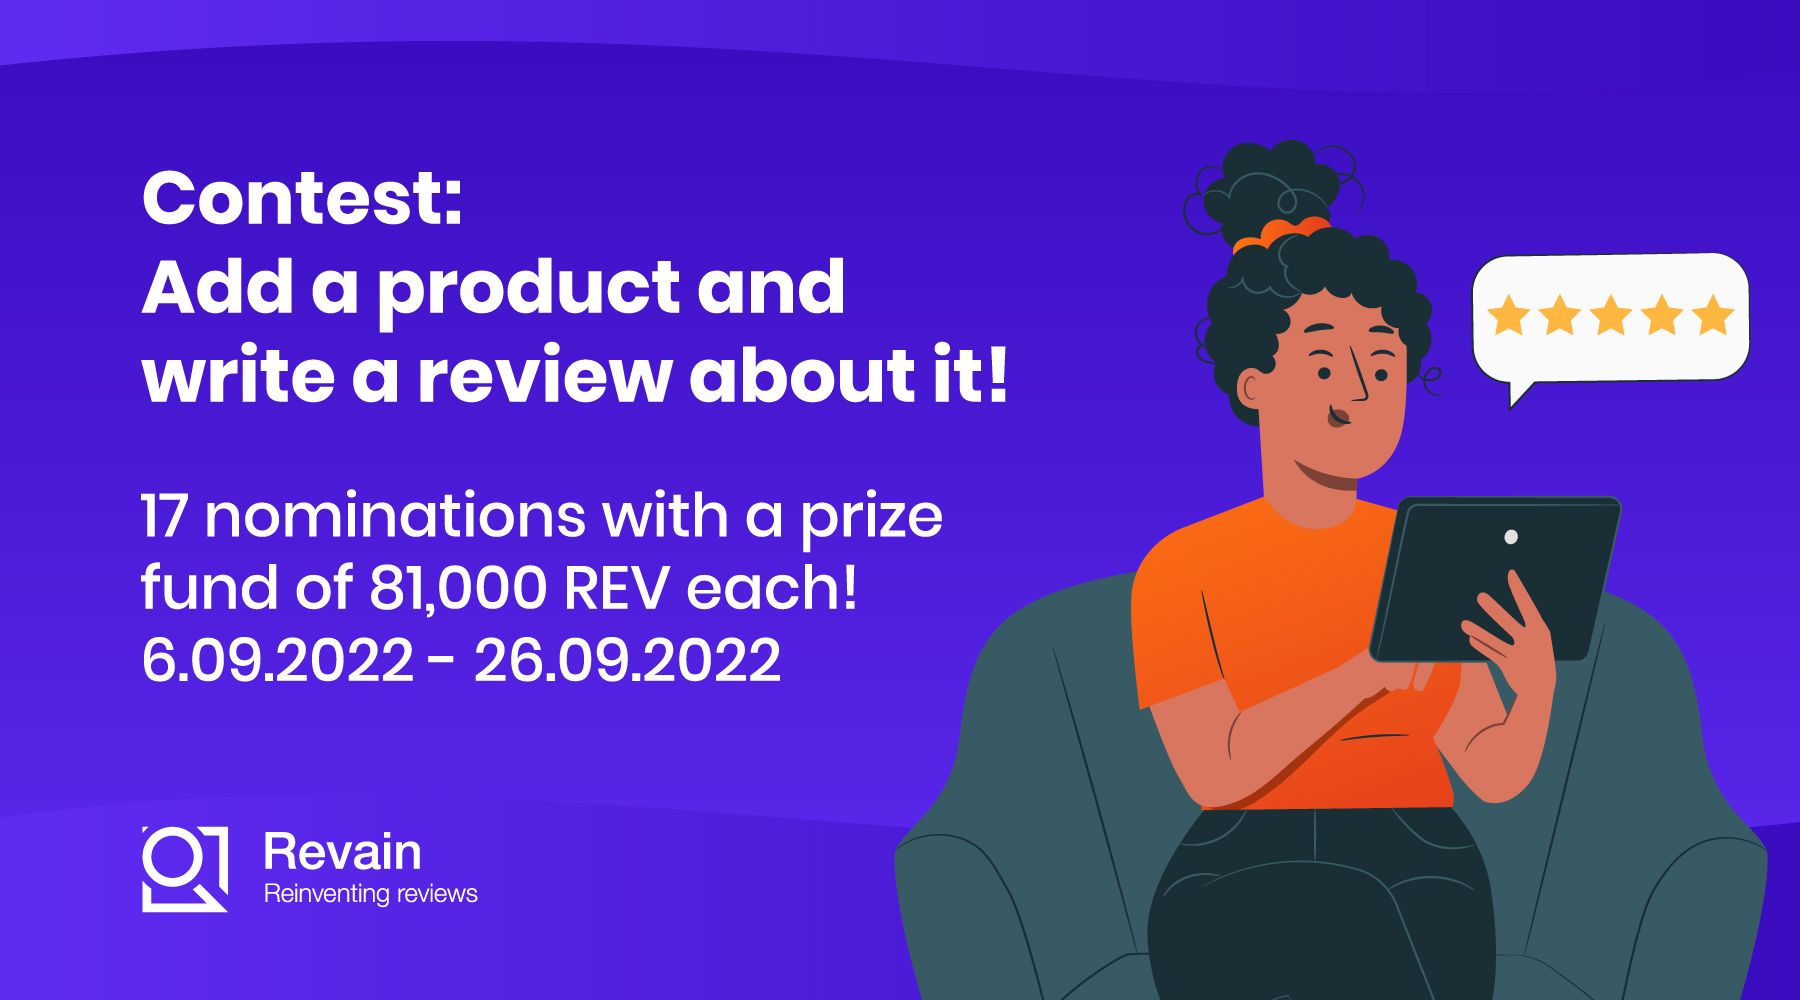 Article Contest: Add your product and write a review about it!